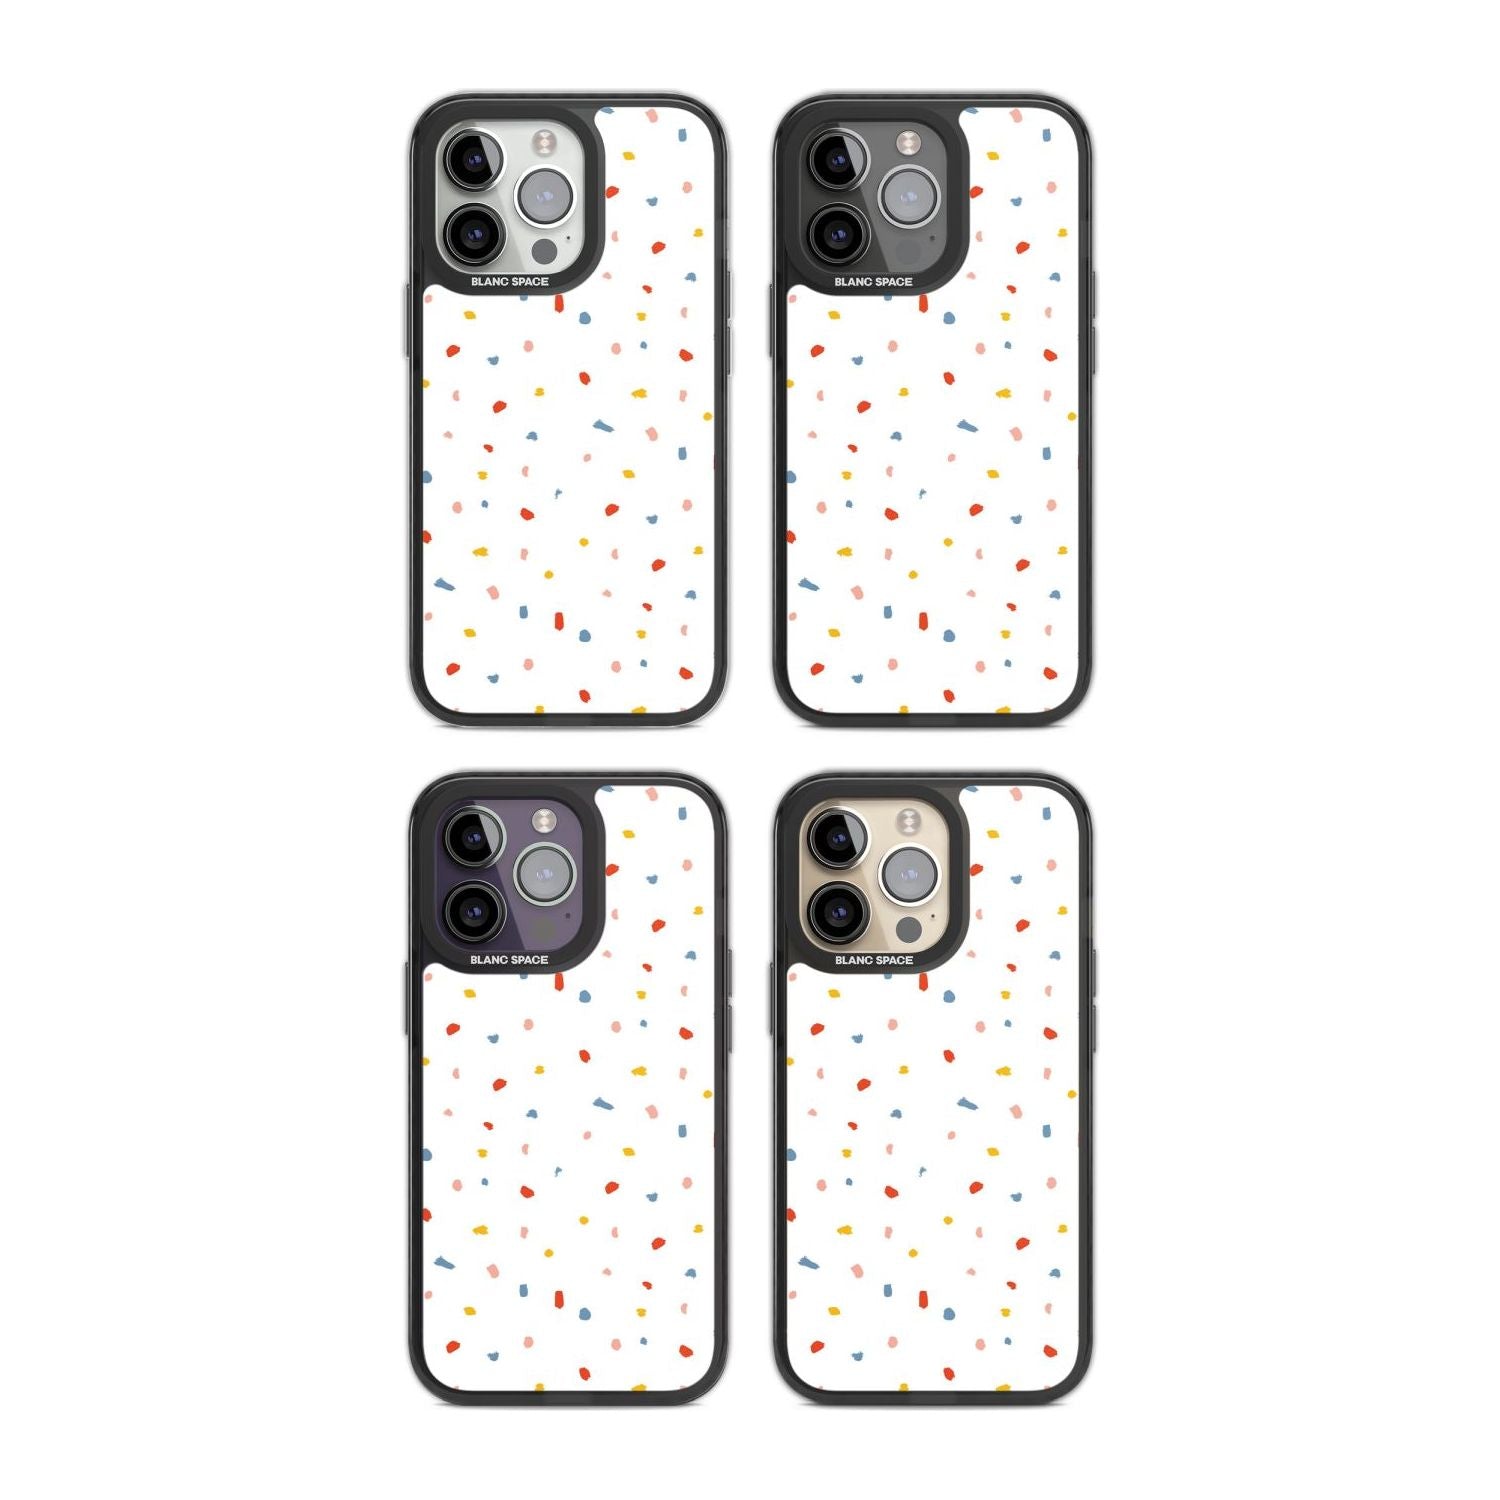 Confetti Print on Solid White Phone Case iPhone 15 Pro Max / Black Impact Case,iPhone 15 Plus / Black Impact Case,iPhone 15 Pro / Black Impact Case,iPhone 15 / Black Impact Case,iPhone 15 Pro Max / Impact Case,iPhone 15 Plus / Impact Case,iPhone 15 Pro / Impact Case,iPhone 15 / Impact Case,iPhone 15 Pro Max / Magsafe Black Impact Case,iPhone 15 Plus / Magsafe Black Impact Case,iPhone 15 Pro / Magsafe Black Impact Case,iPhone 15 / Magsafe Black Impact Case,iPhone 14 Pro Max / Black Impact Case,iPhone 14 Plus